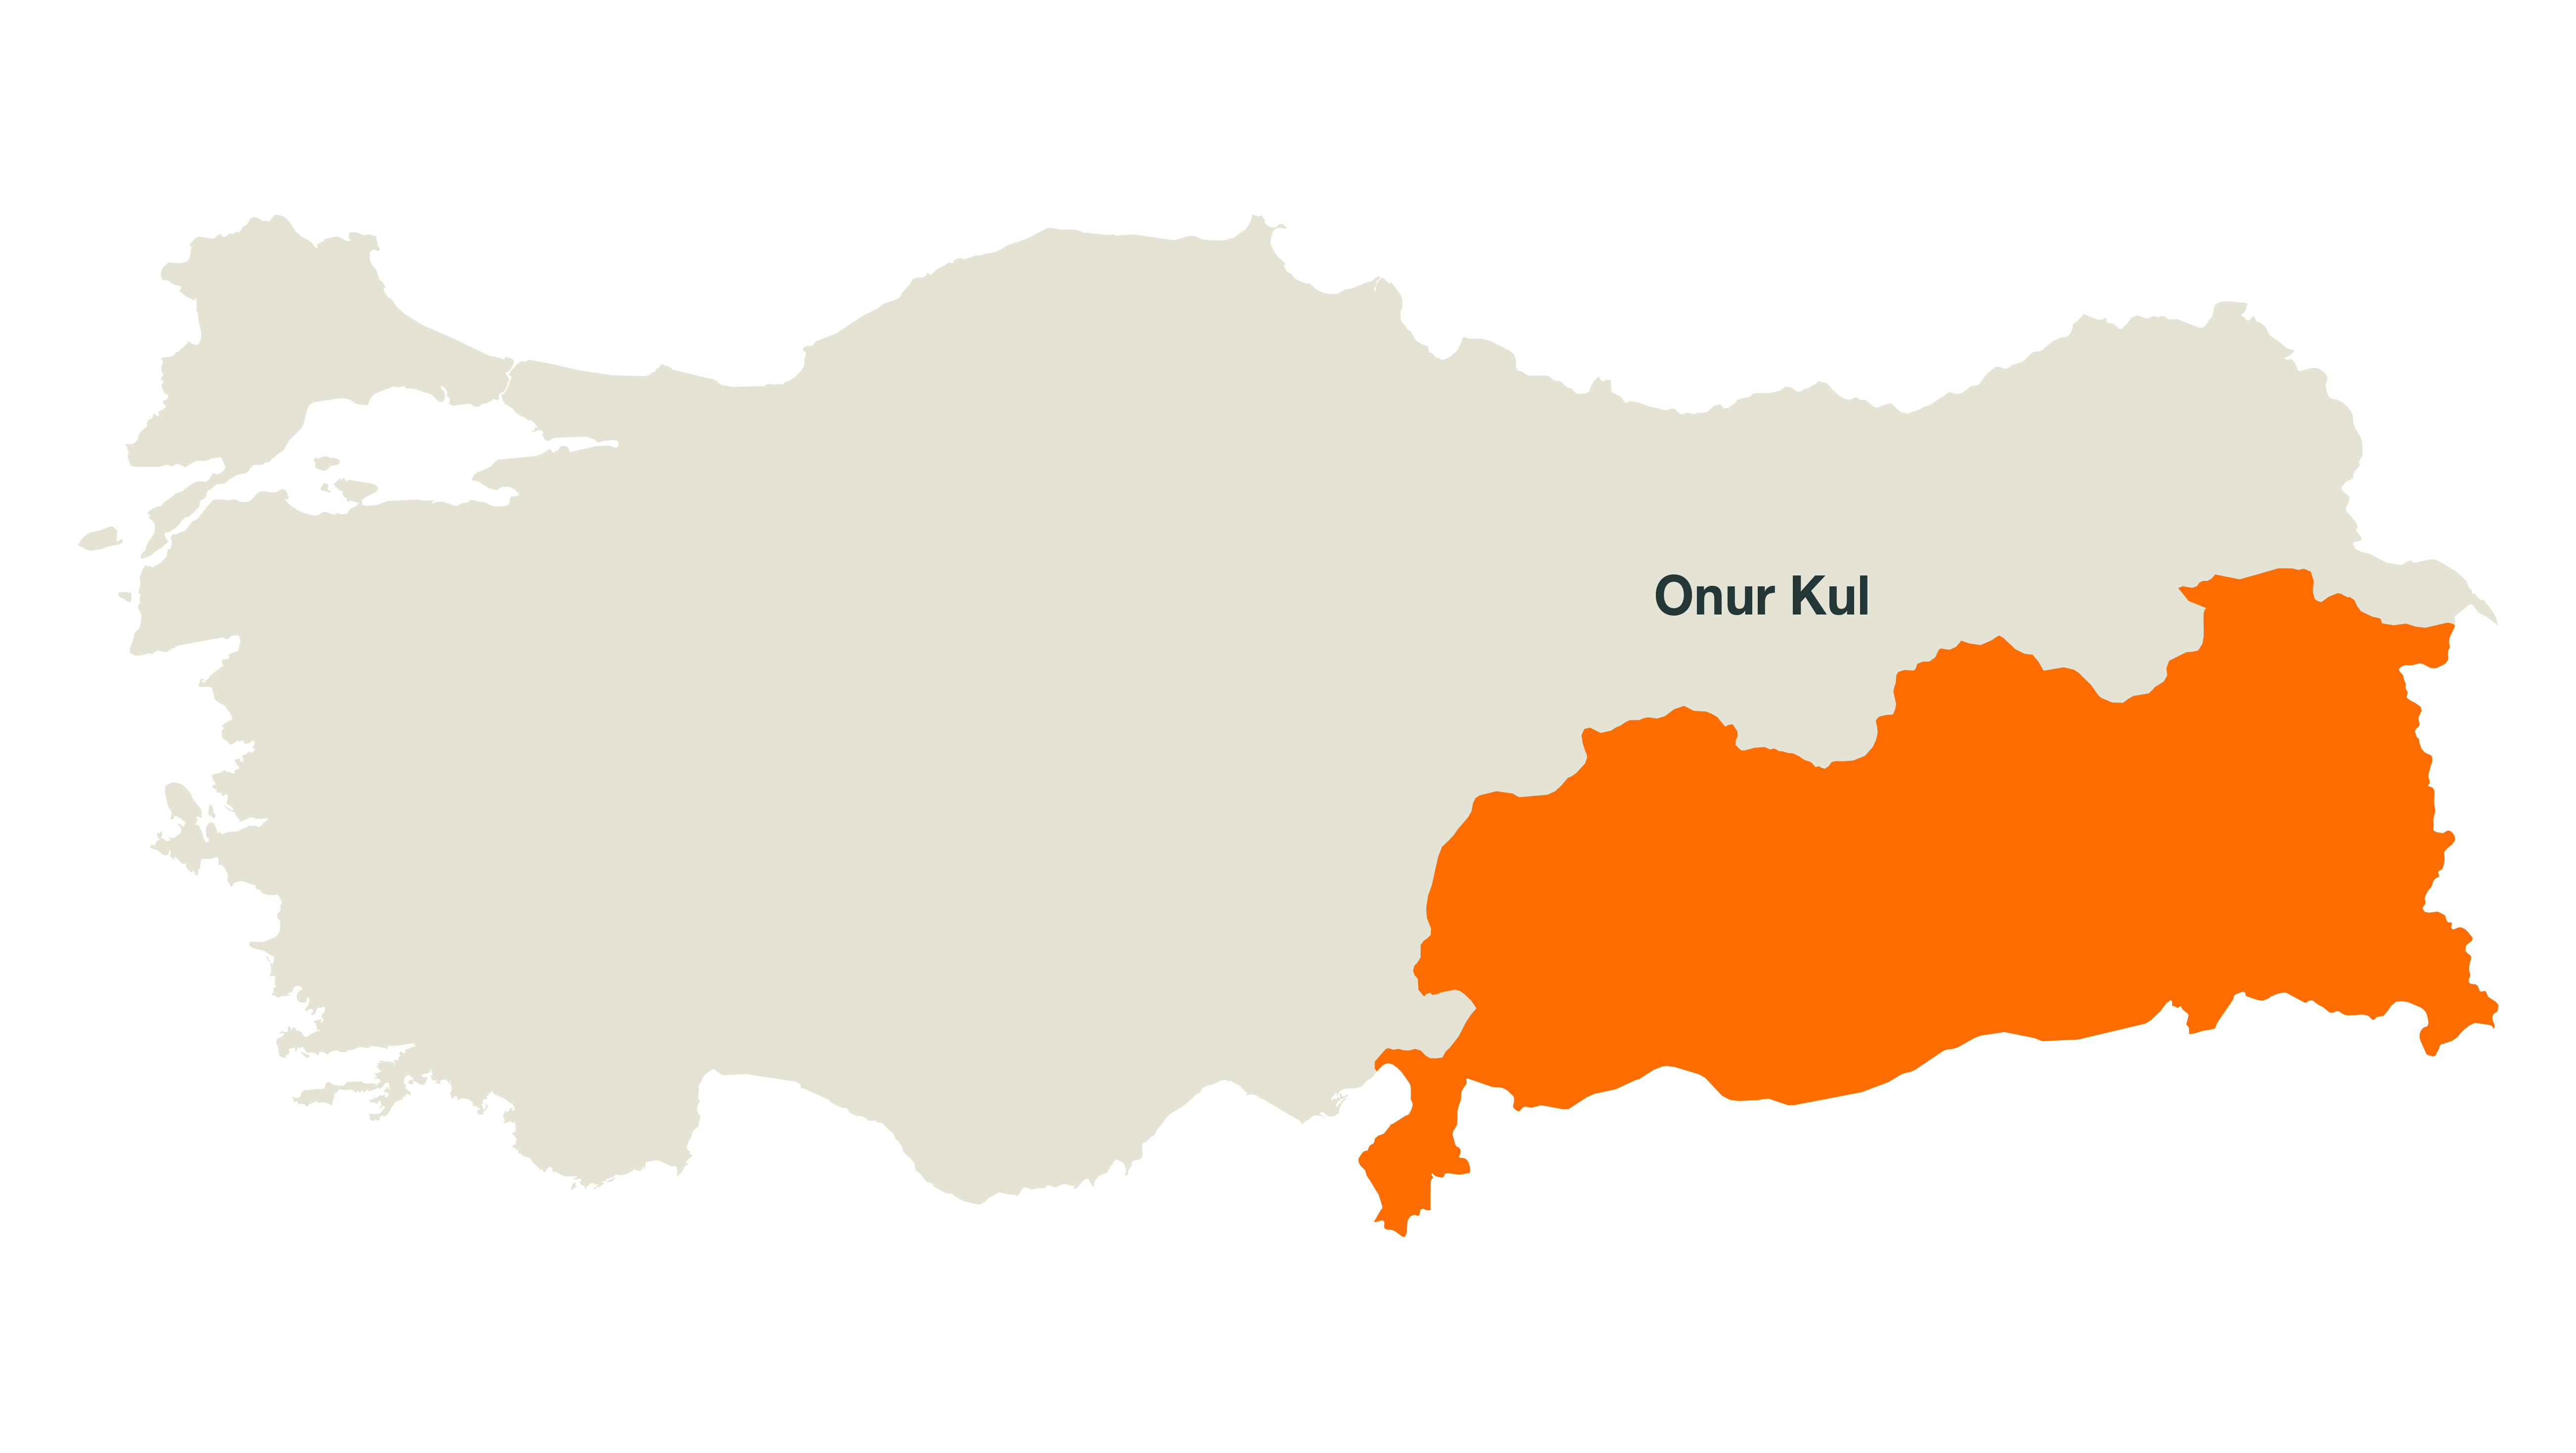 kws-tr-consultant-map-sugarbeet-onur-kul.png